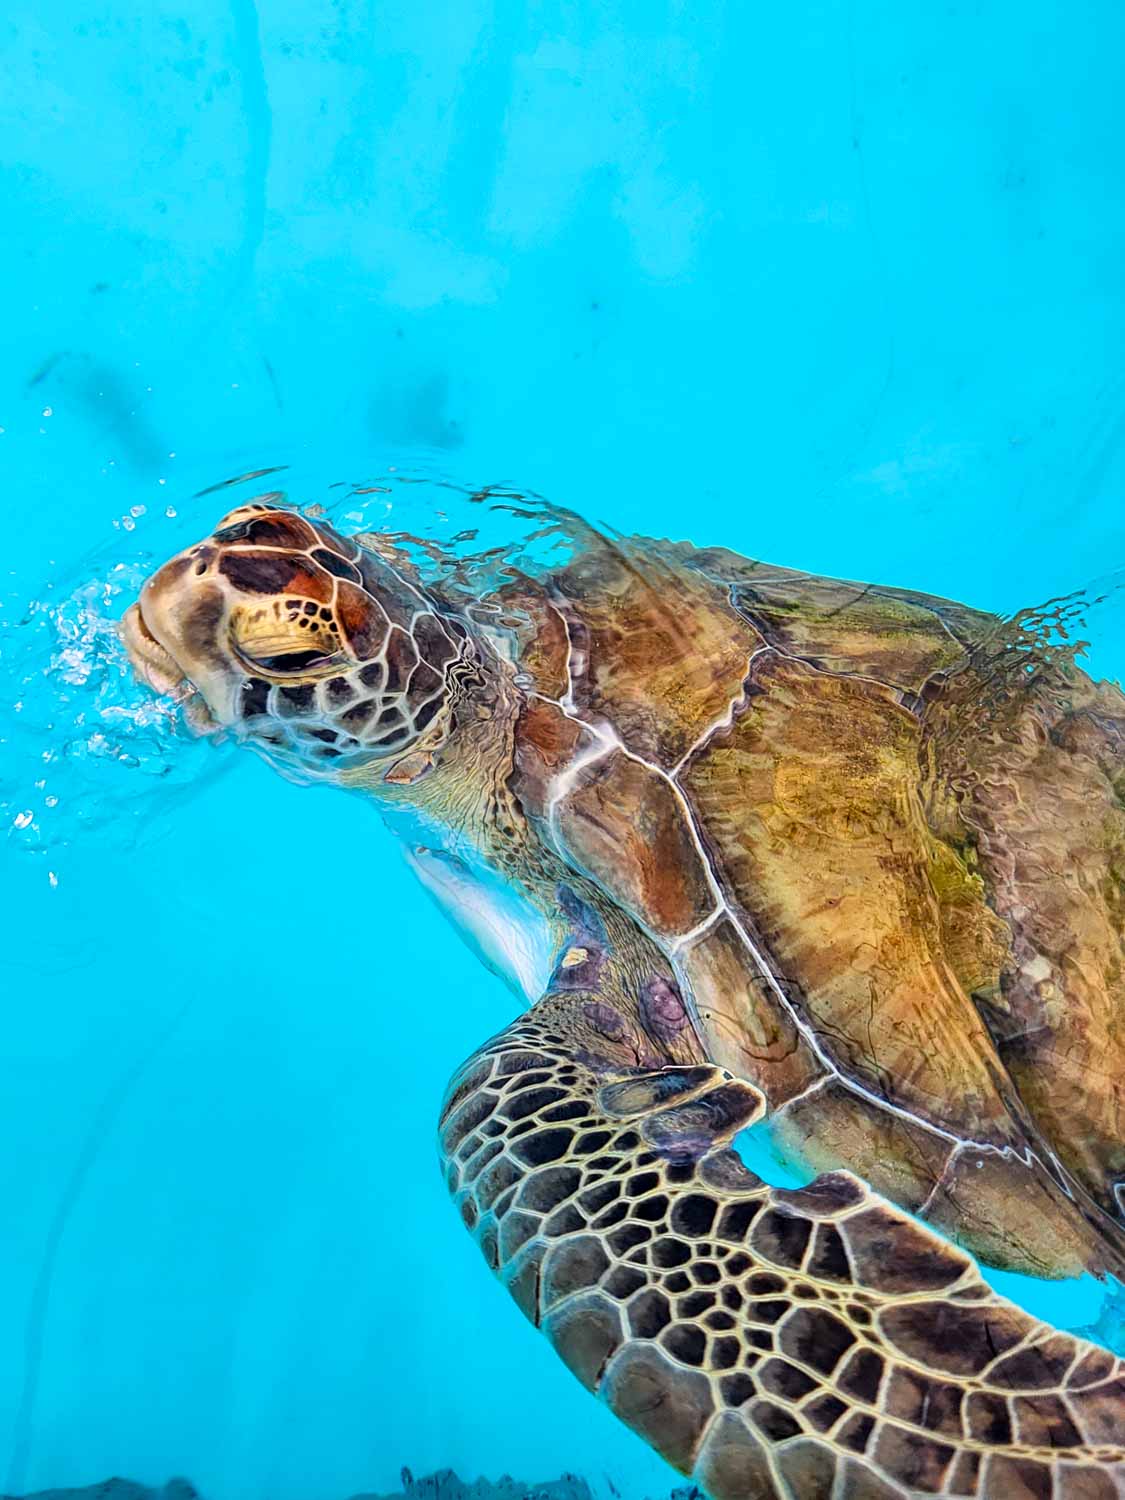 Turtle poking its head out of the turquoise water in a tank at Marathon Turtle Hospital, one of the unmissable stops in a Florida family road trip itinerary